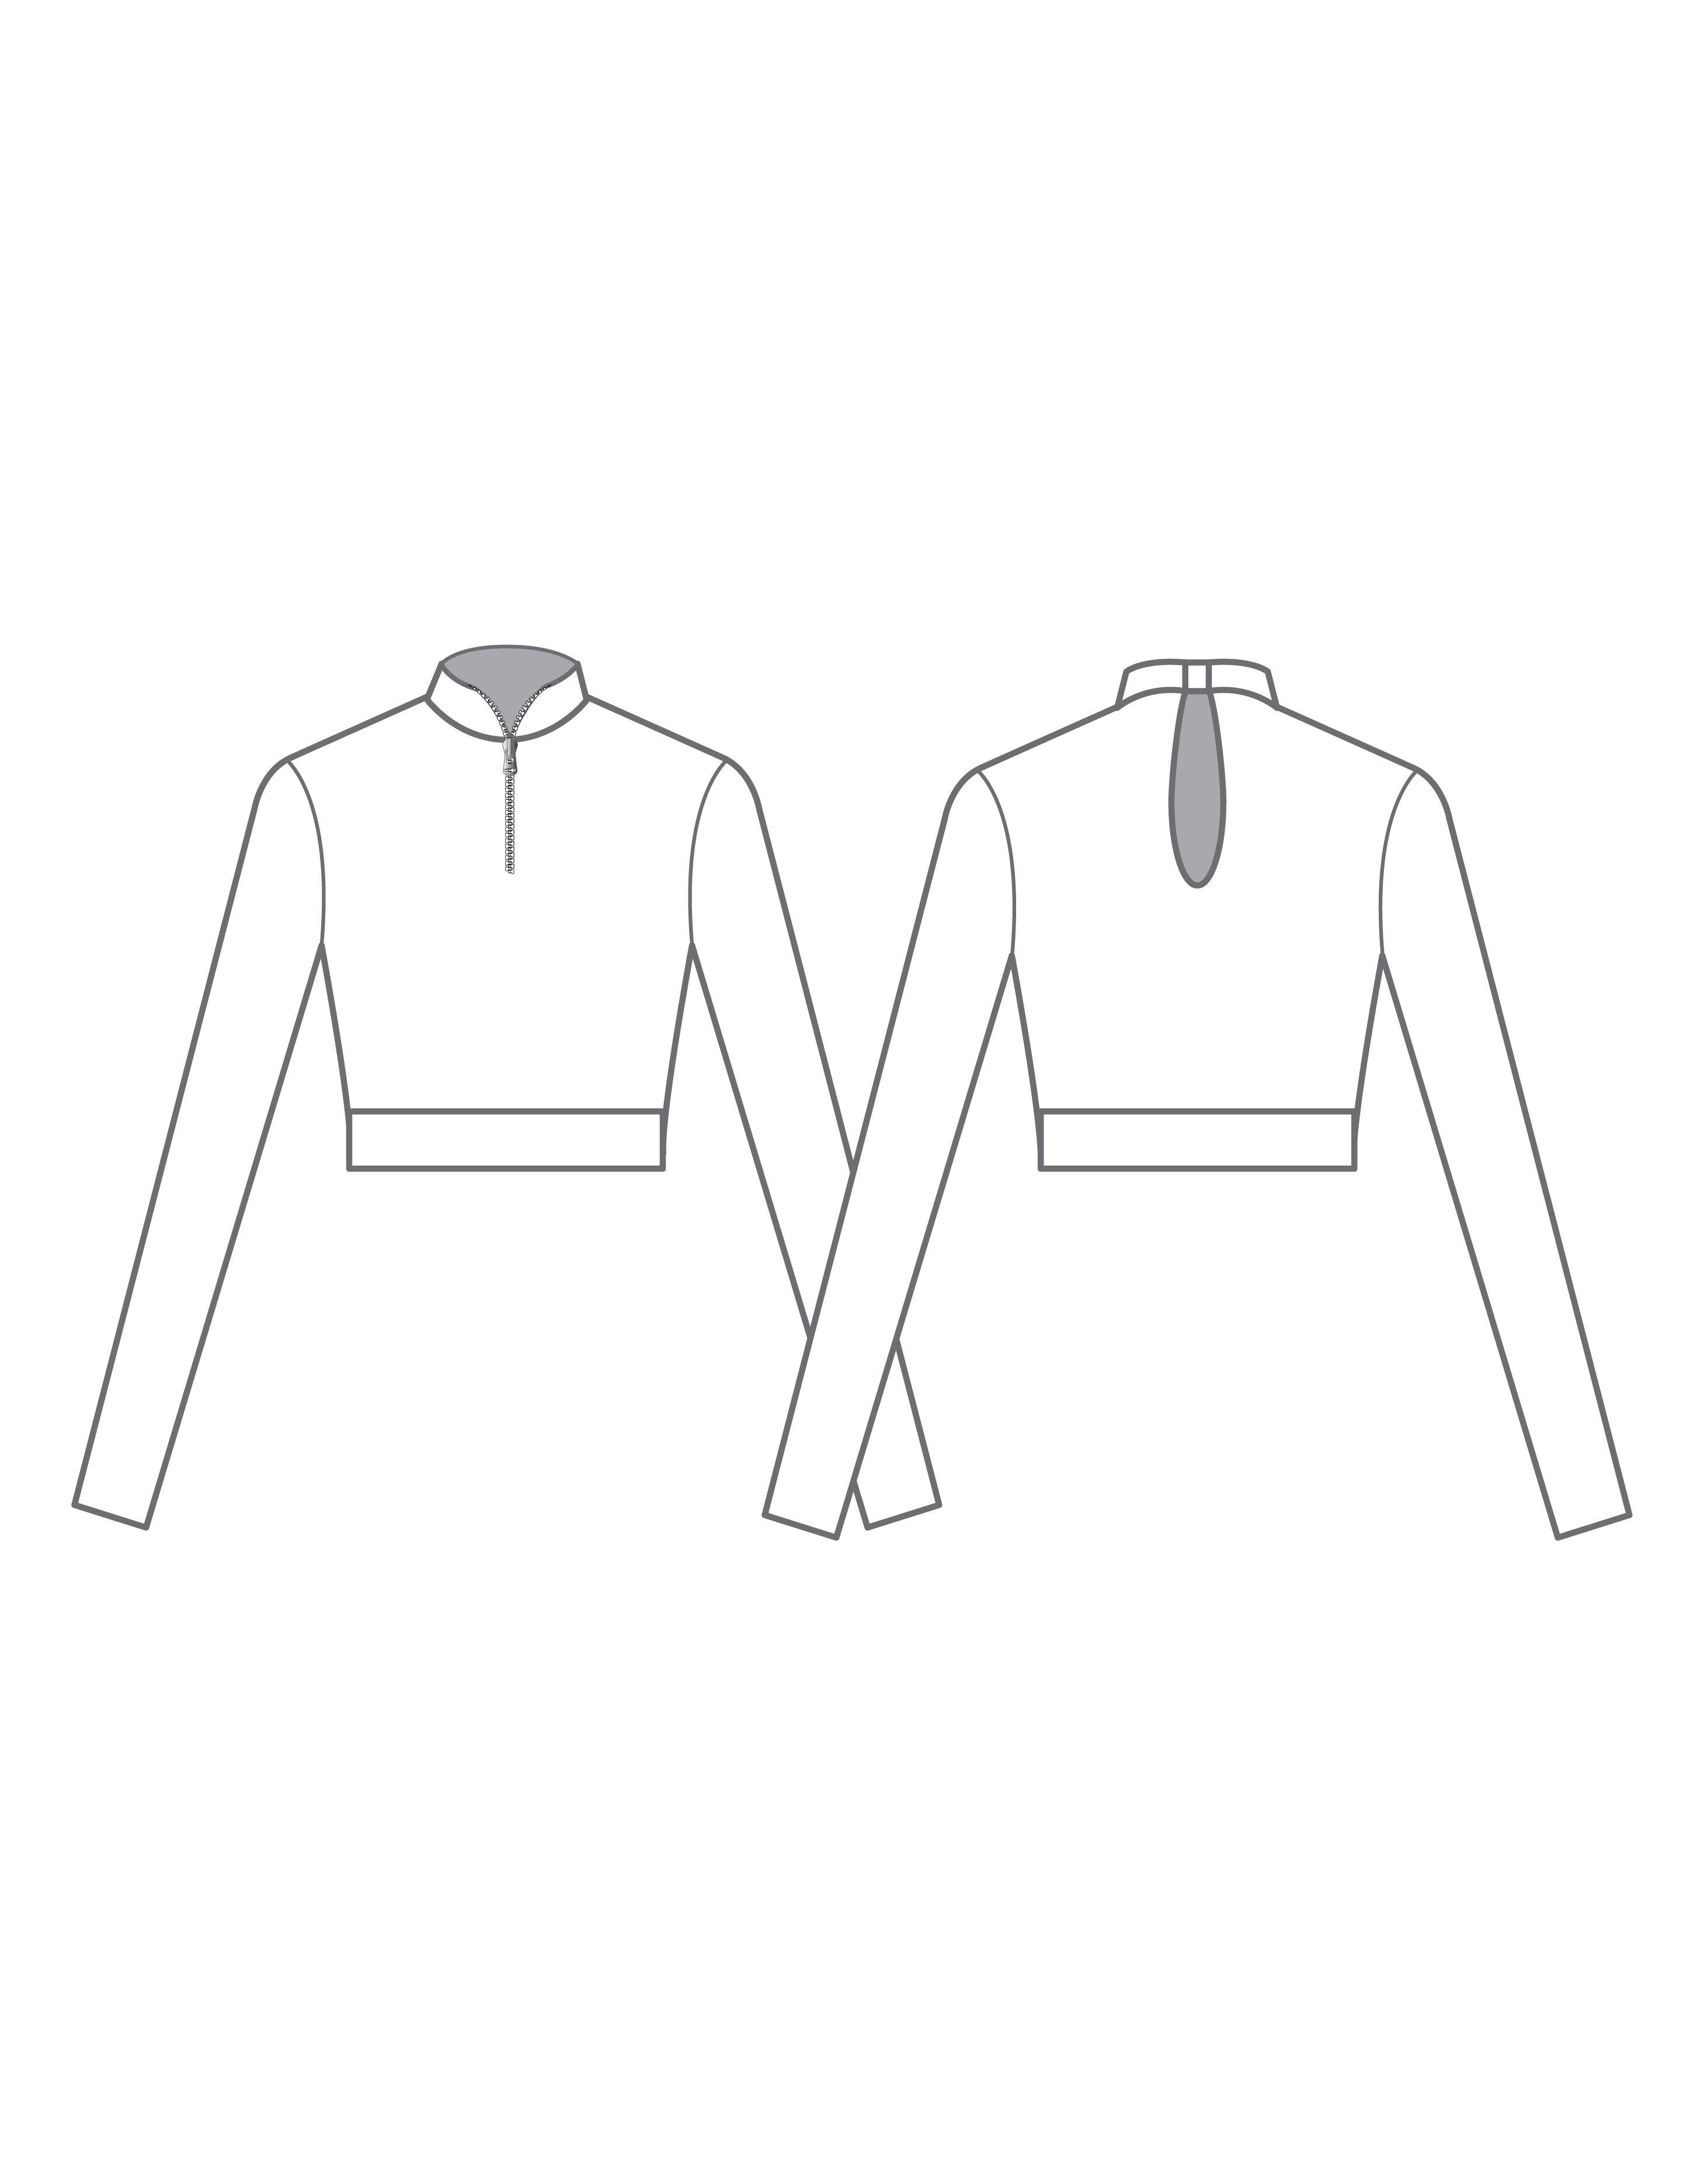 Rays Zipper Front Crop Top - Hamilton Theatrical